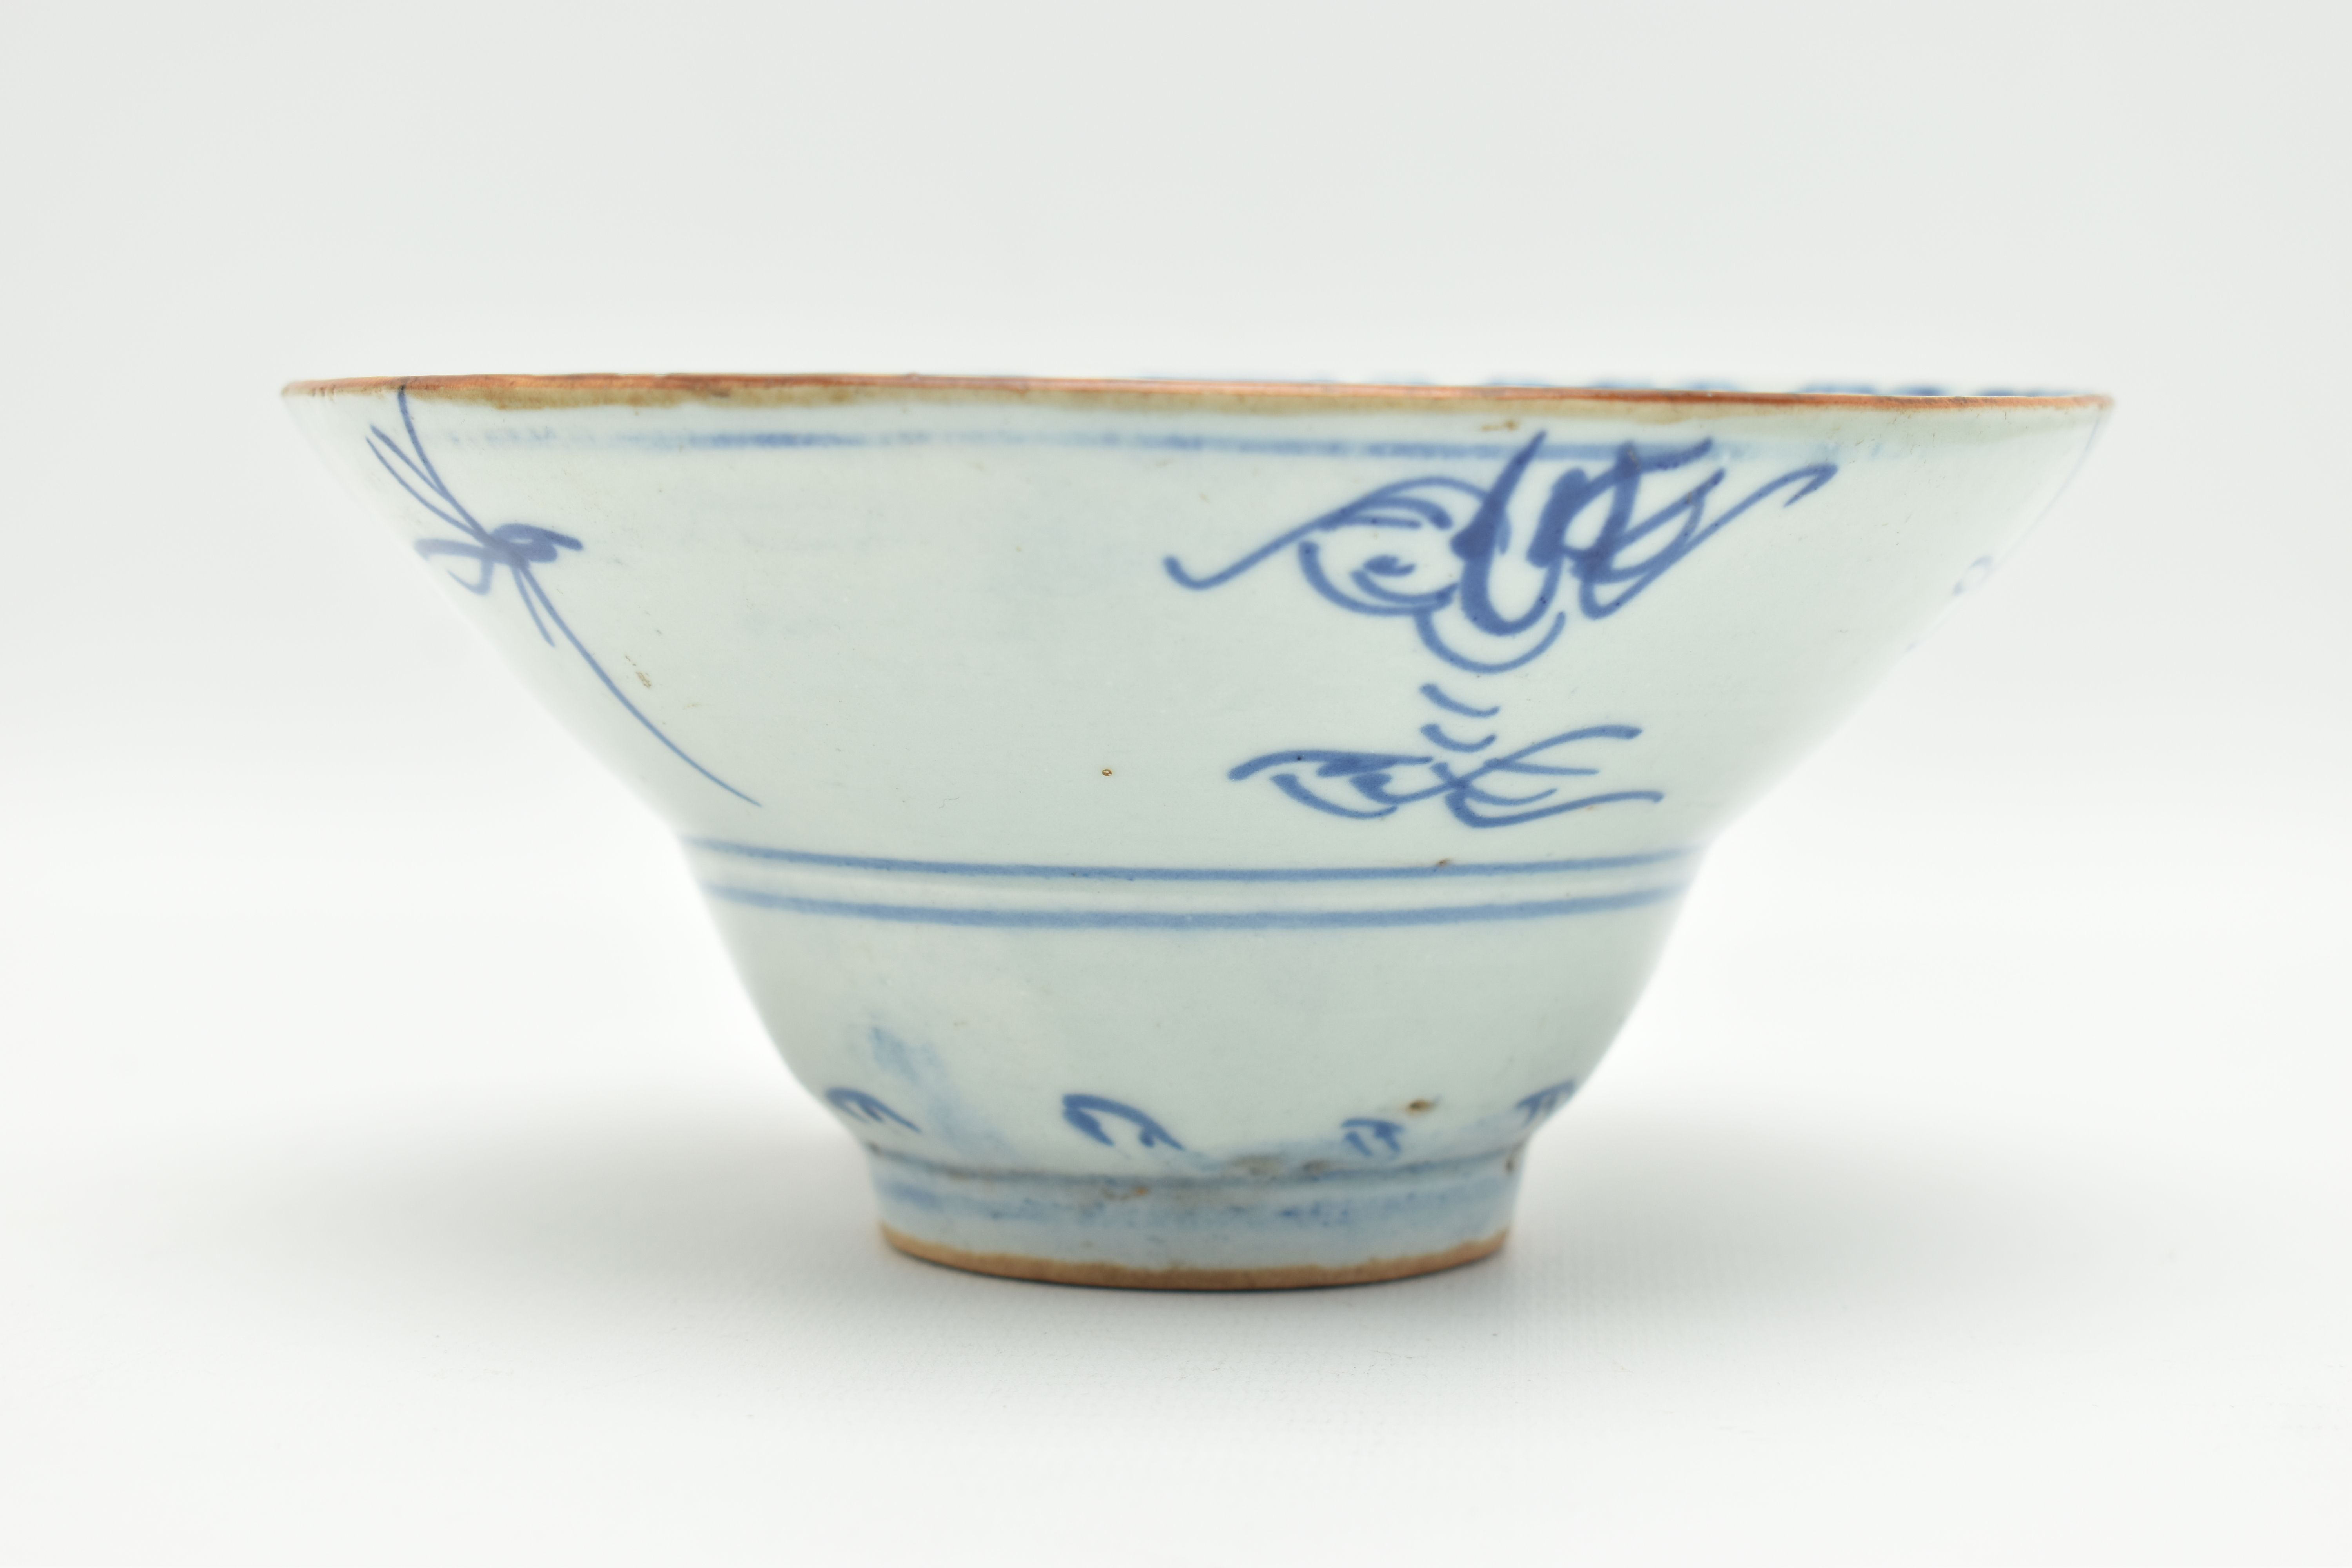 A LATE 18TH / EARLY 19TH CENTURY CHINESE PORCELAIN BLUE AND WHITE PORCELAIN TEK SING CARGO TYPE - Image 5 of 8